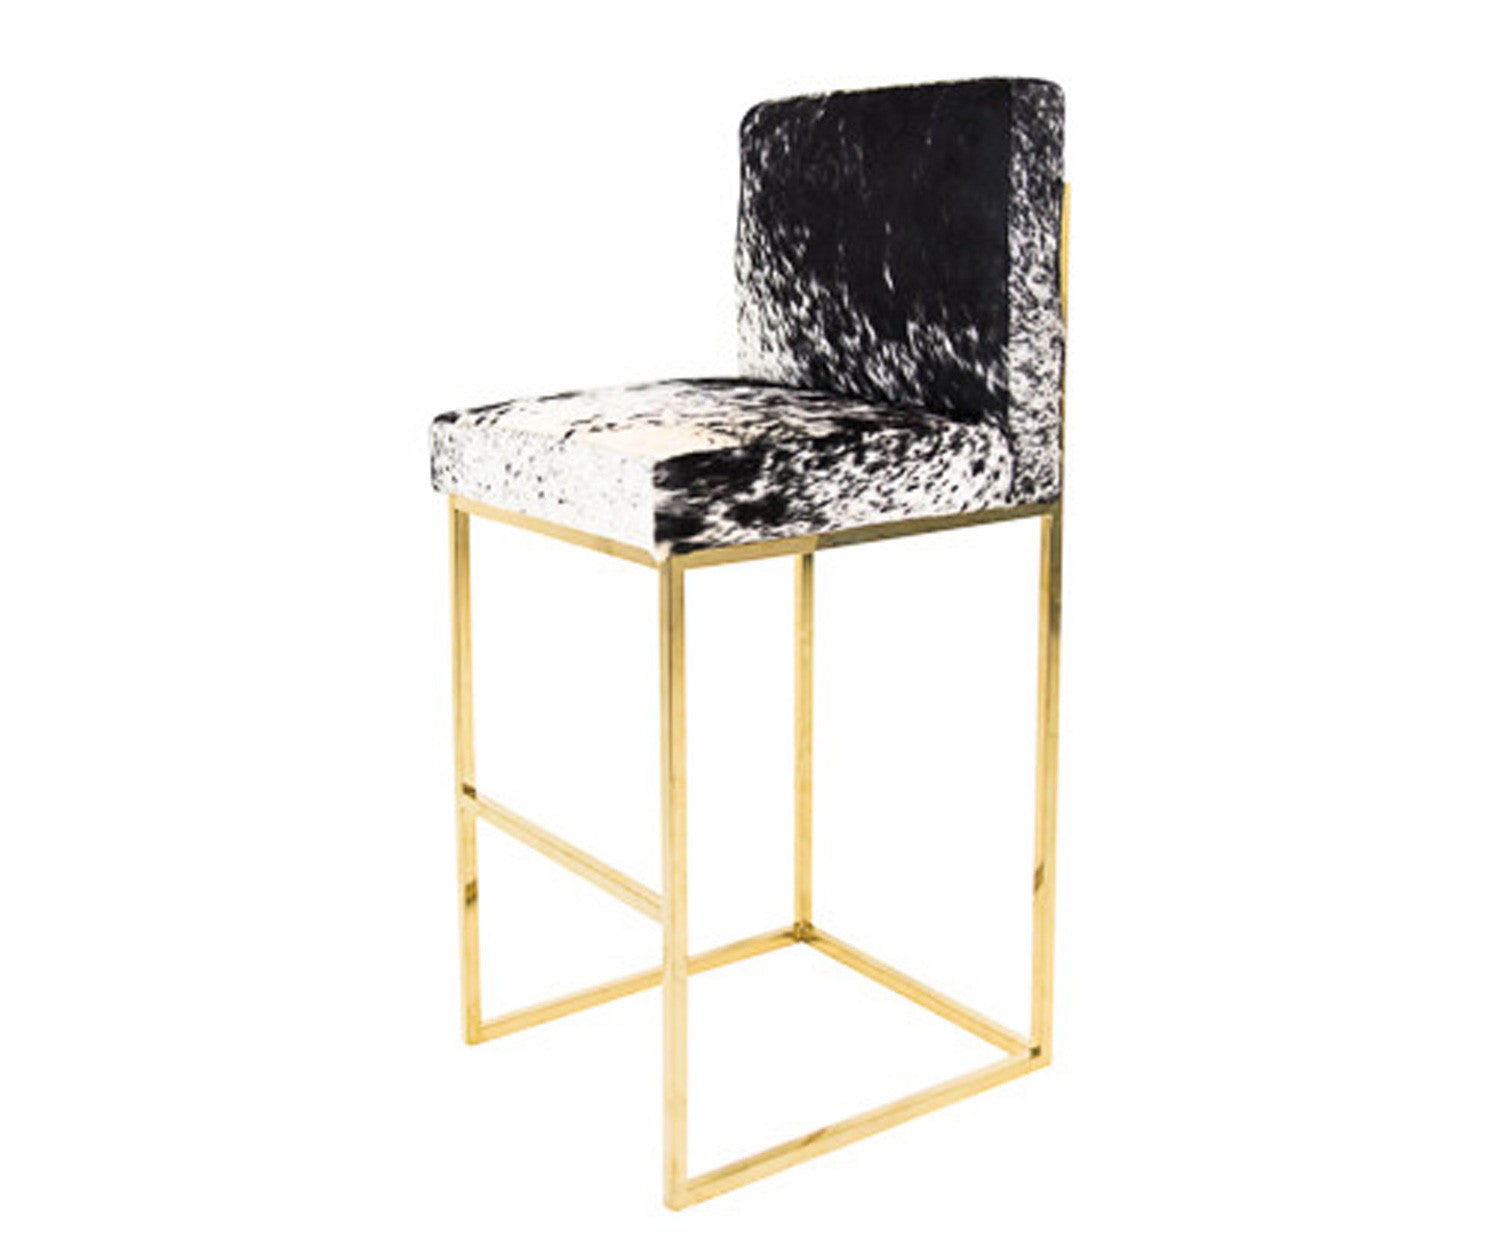 Bar Stool In B W Spotted Cowhide With Brass Legs Modshop